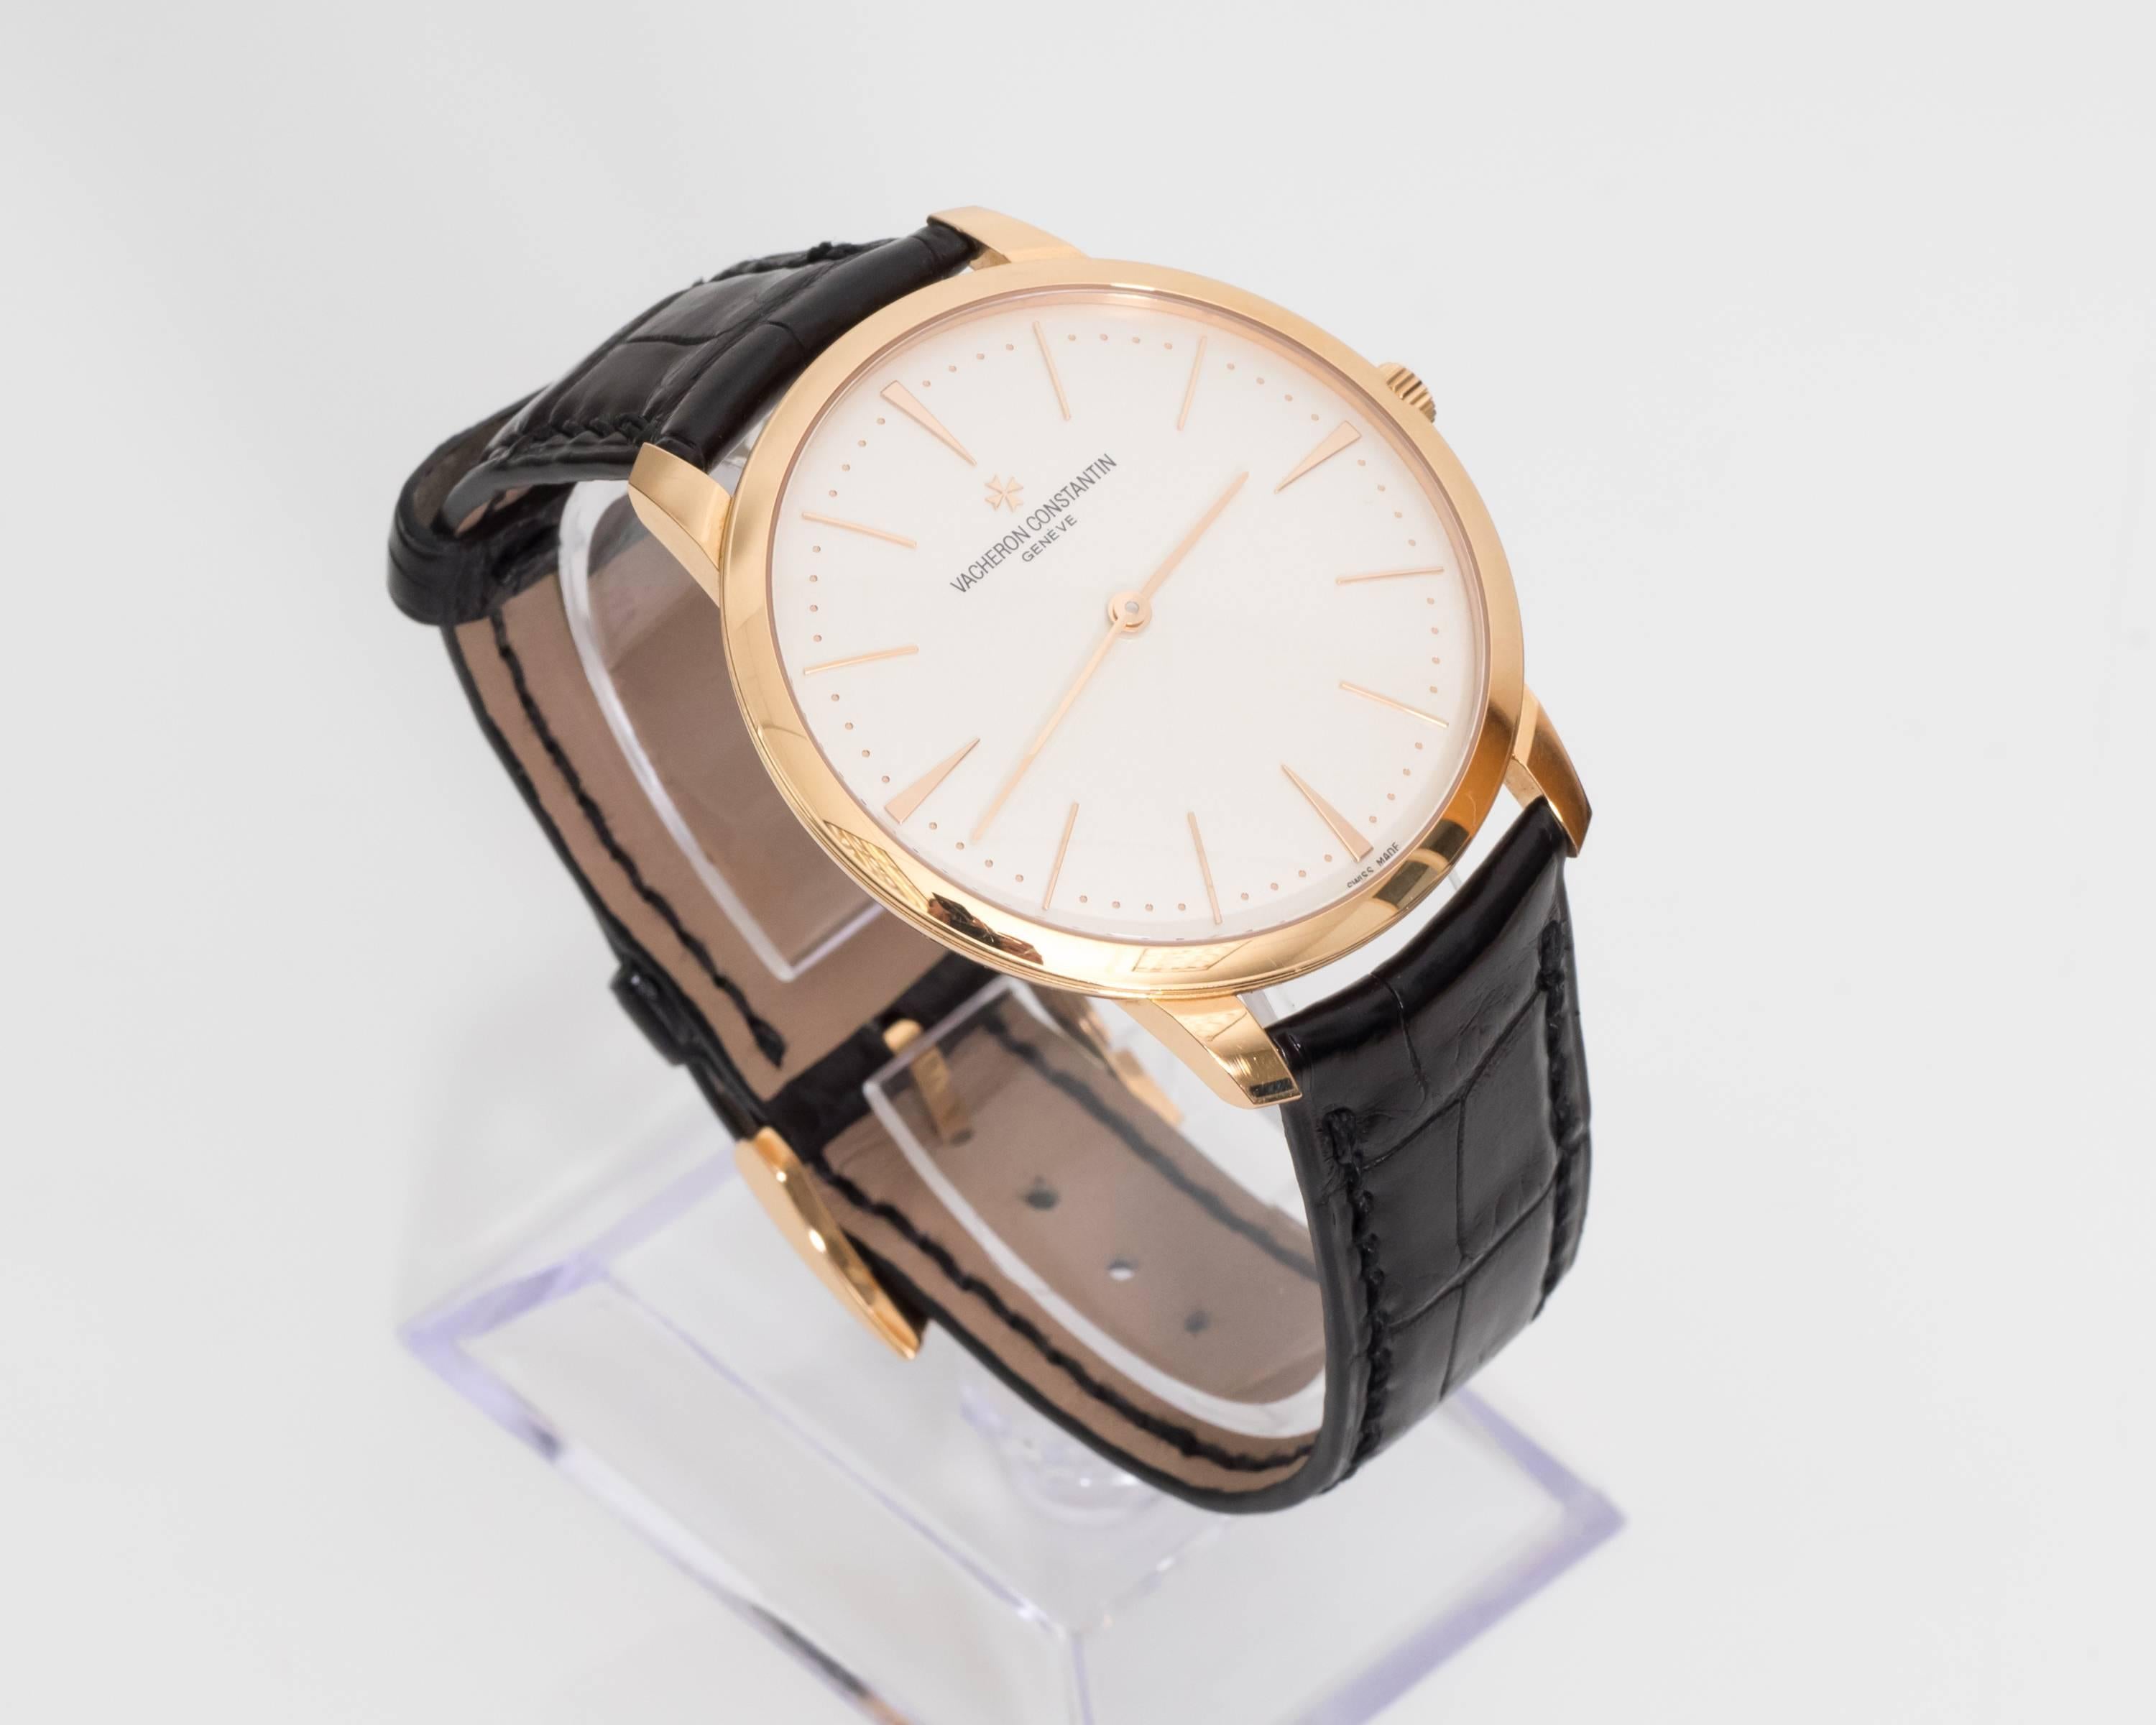 Vacheron Constantin Watch Crafted in 18 Karat Rose Gold Accents on Dial, Face and Markers.  This watch has a modern look with a ultra sleek finish that will last a lifetime! 

The hallmark "Vacheron Constantin Geneve 81180 1262438 Au750 SWISS